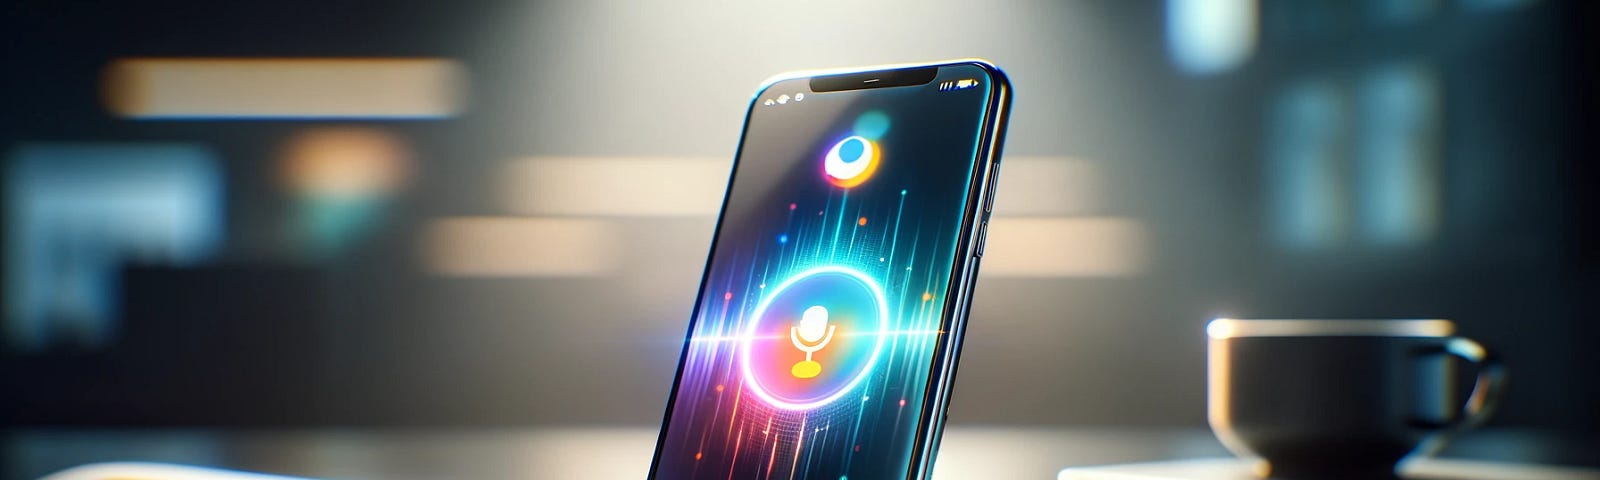 A futuristic smartphone displaying an AI assistant interface on its screen, symbolizing the advanced capabilities of Siri and Google Assistant, placed on a modern desk with a focus on simplicity and innovation.